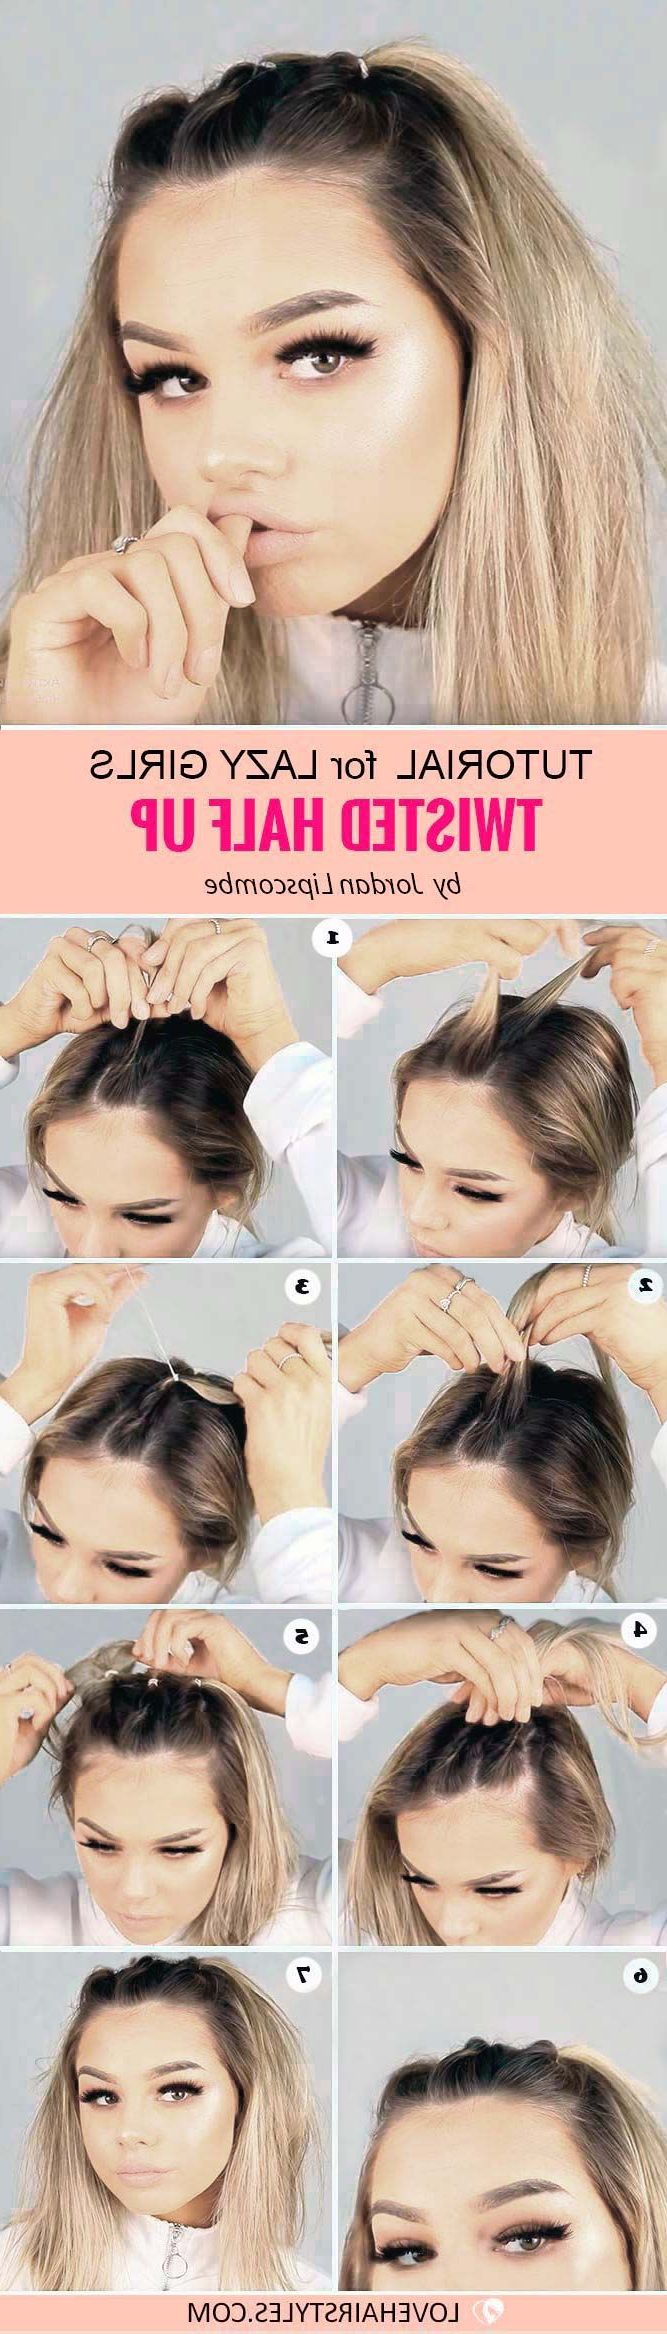 Haircut For Big Forehead,  Lazy Hairstyles, Medium Length Hair Styles Pertaining To Well Liked Easy Hairstyles For Medium Length Hair (View 9 of 20)